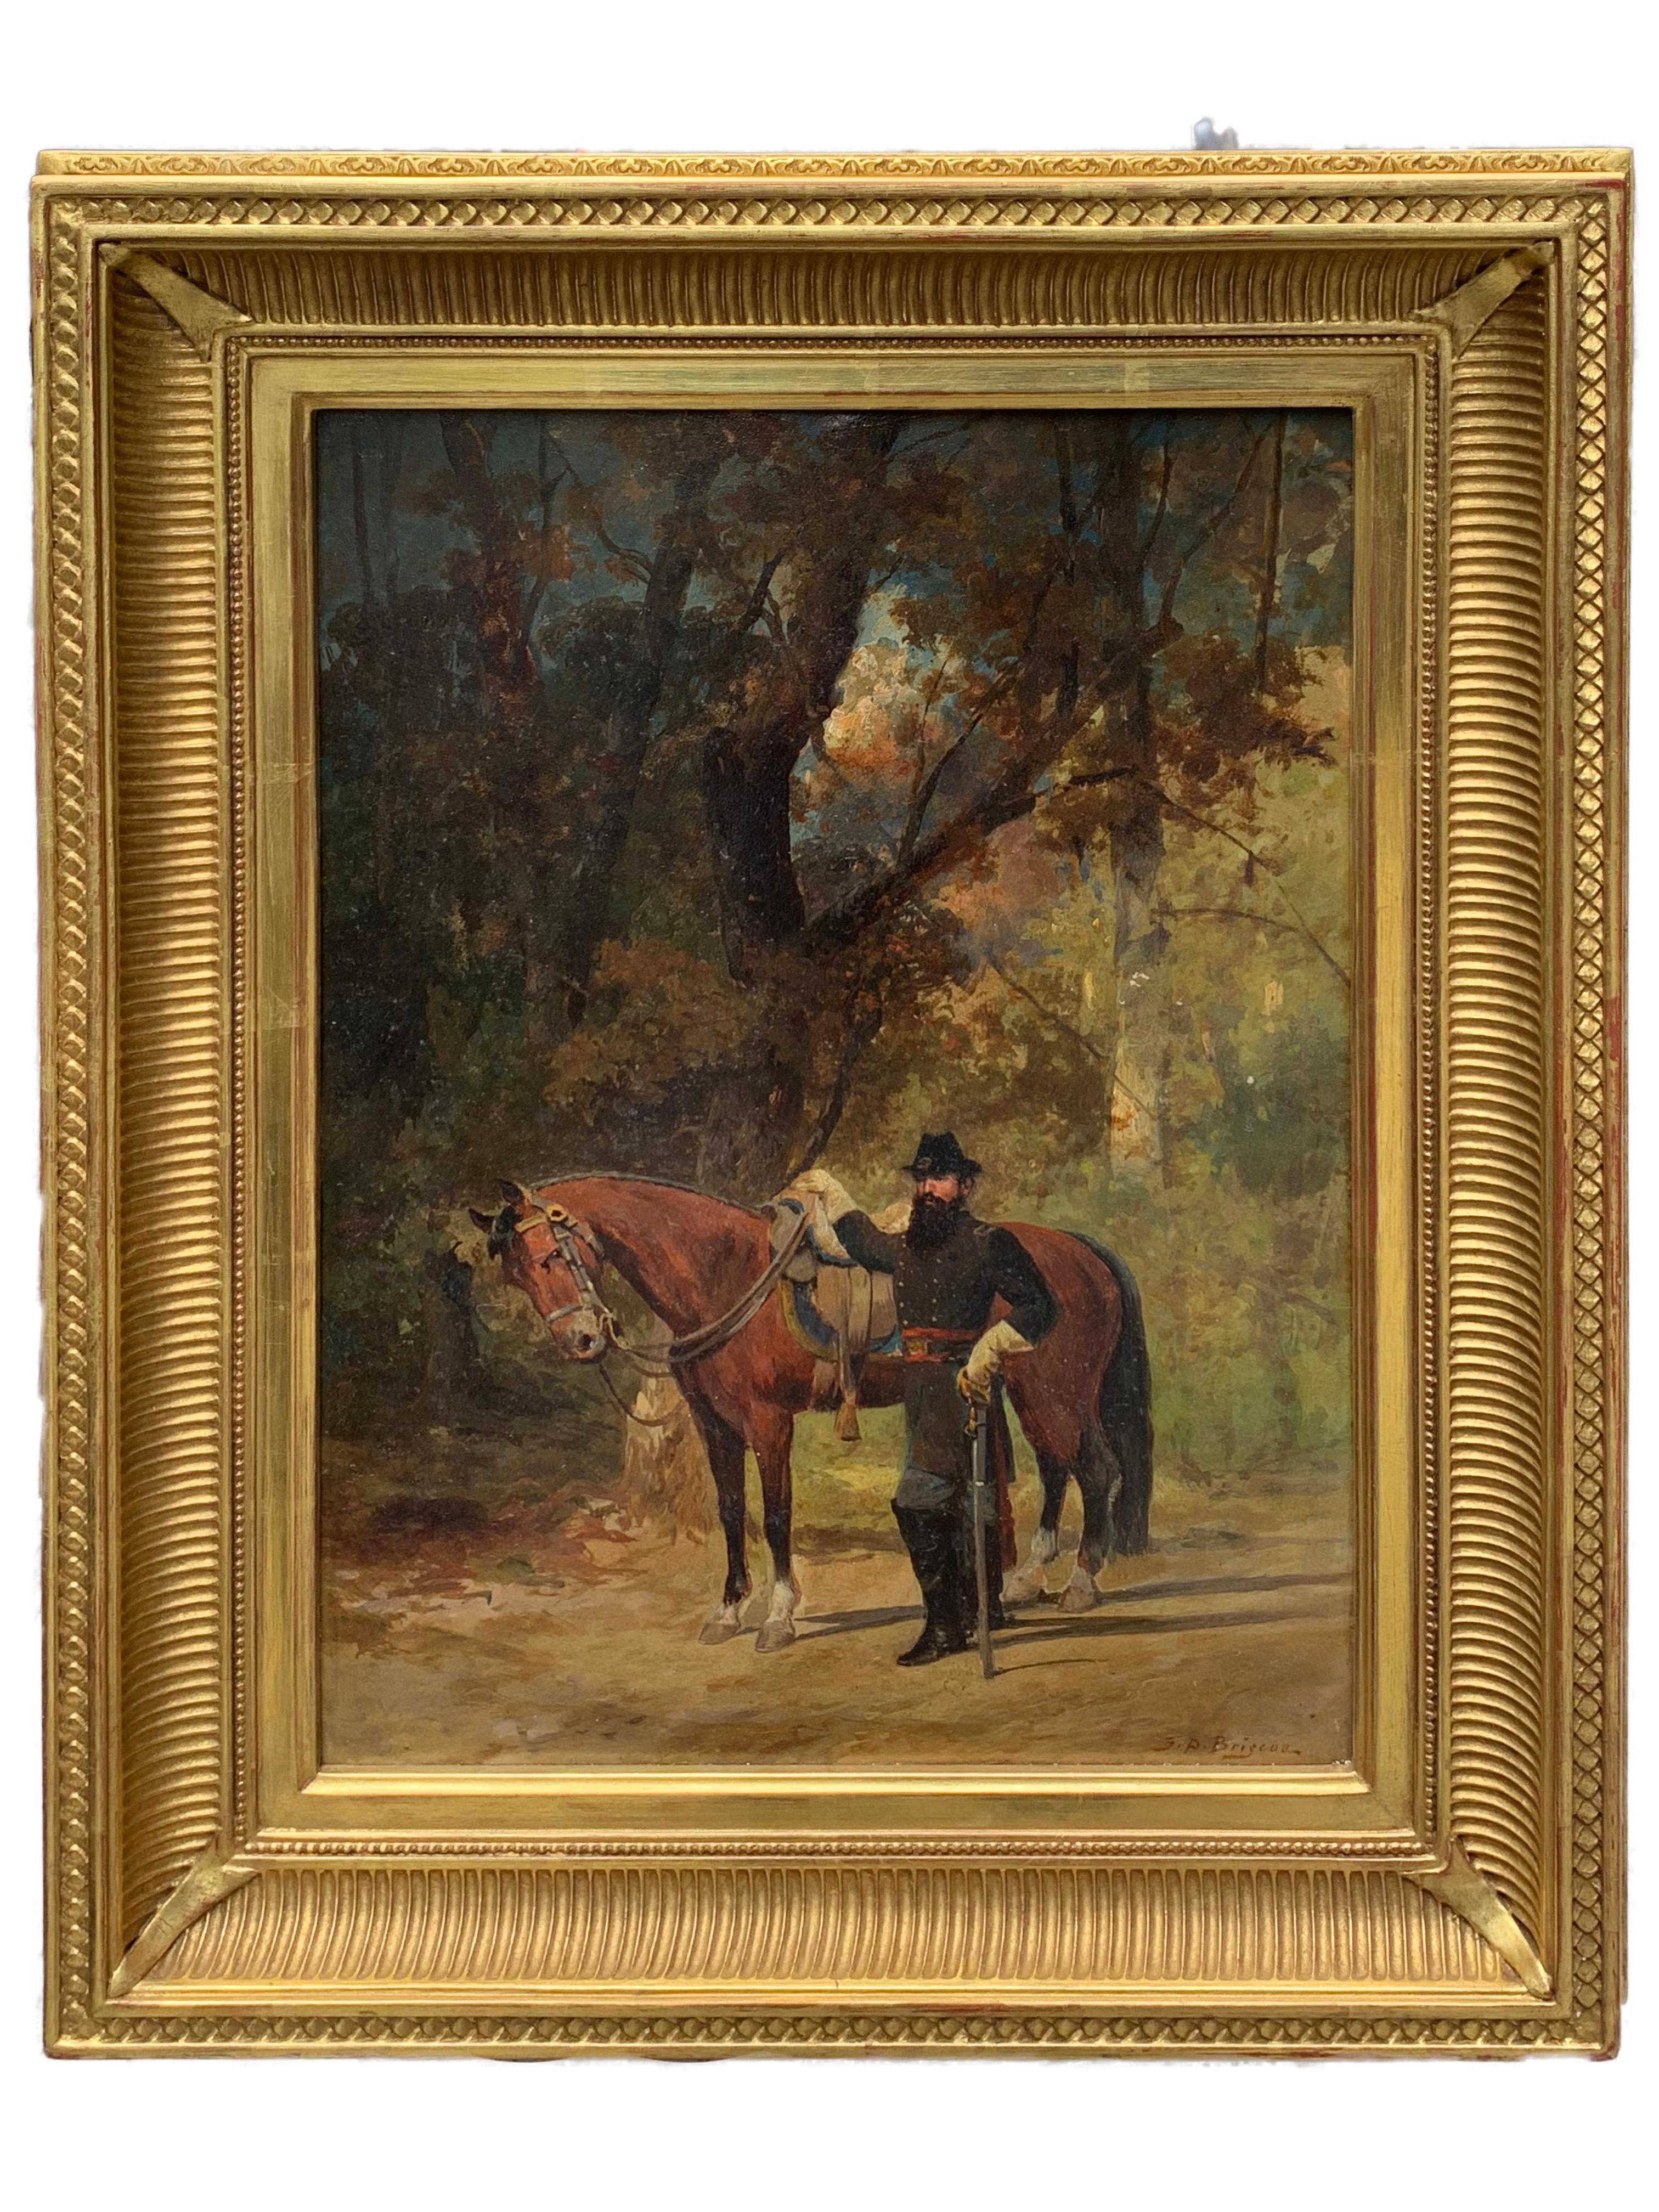 Franklin Dullin Briscoe Portrait Painting - PERIOD American Antique Civil War Portrait of Officer and His Horse 